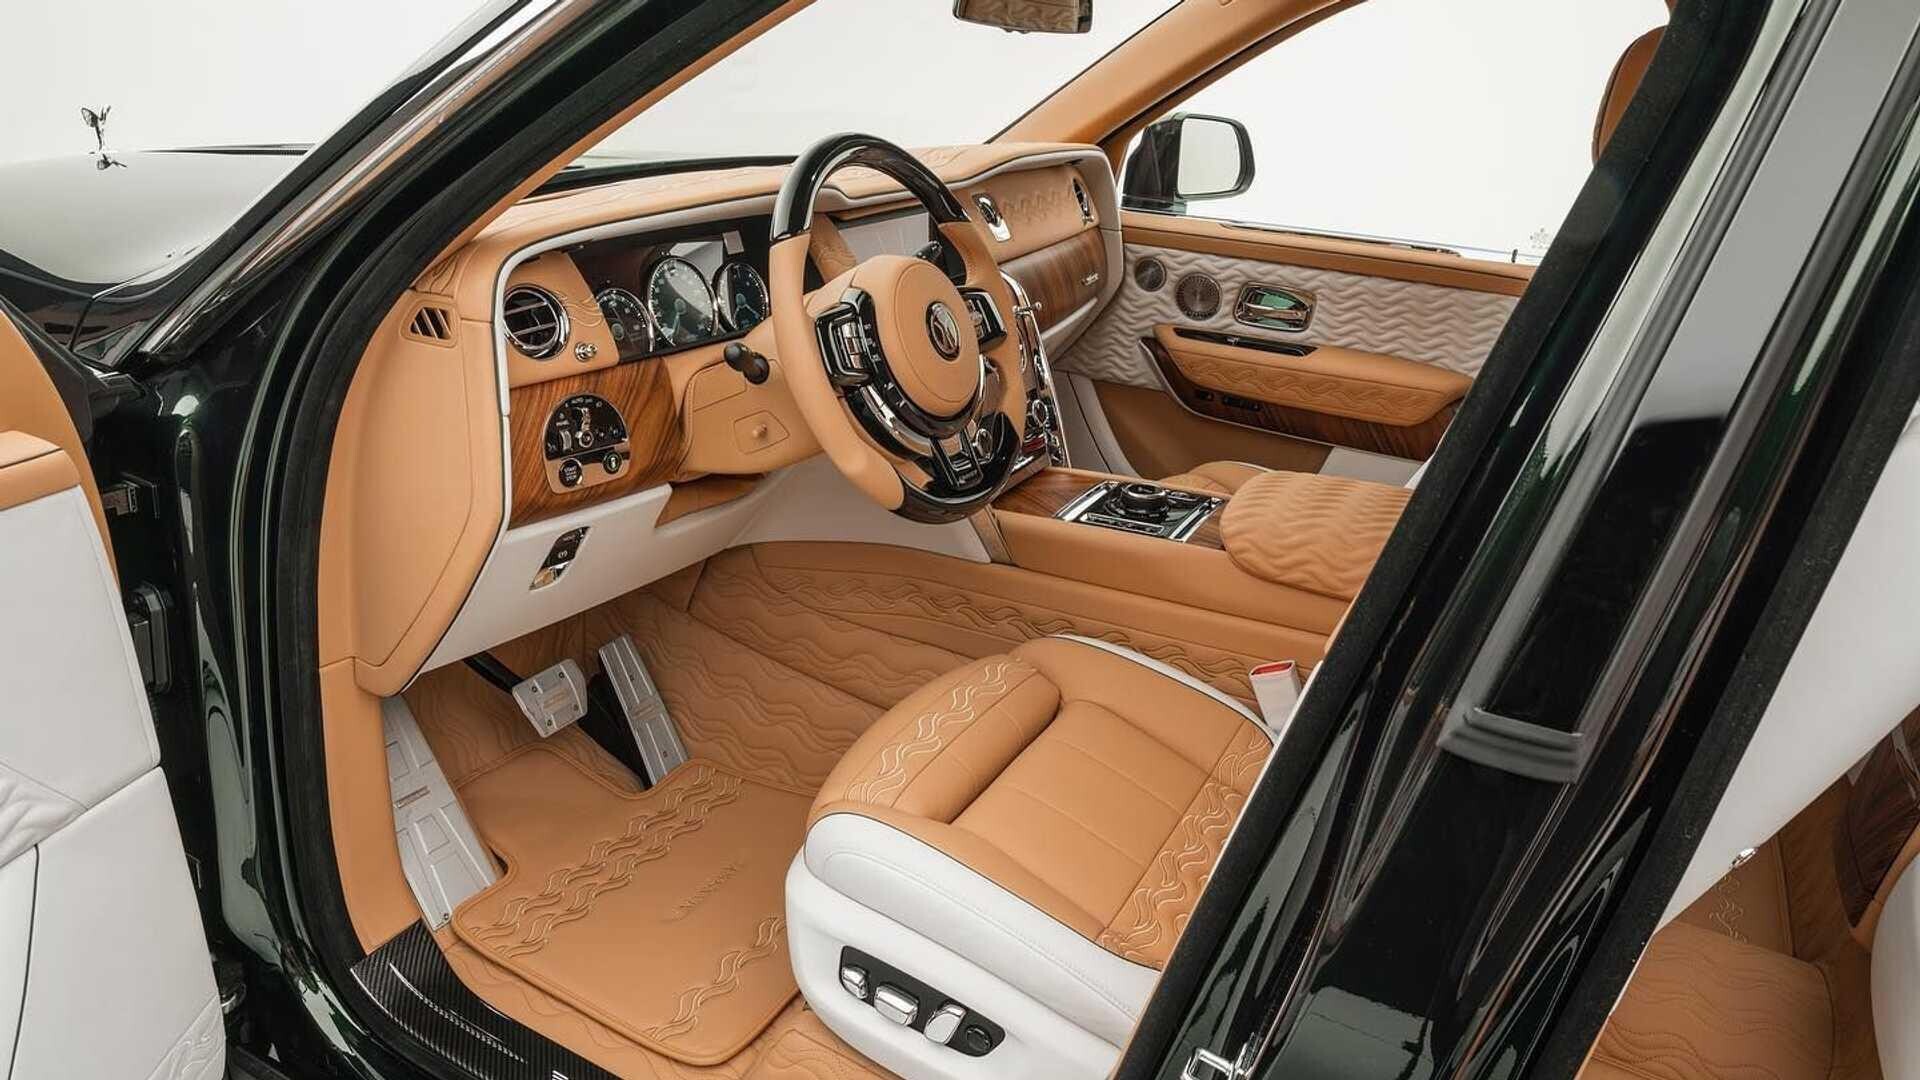 RollsRoyce Cullinan gets the Carlex treatment with new Yachting Edition   Top Gear